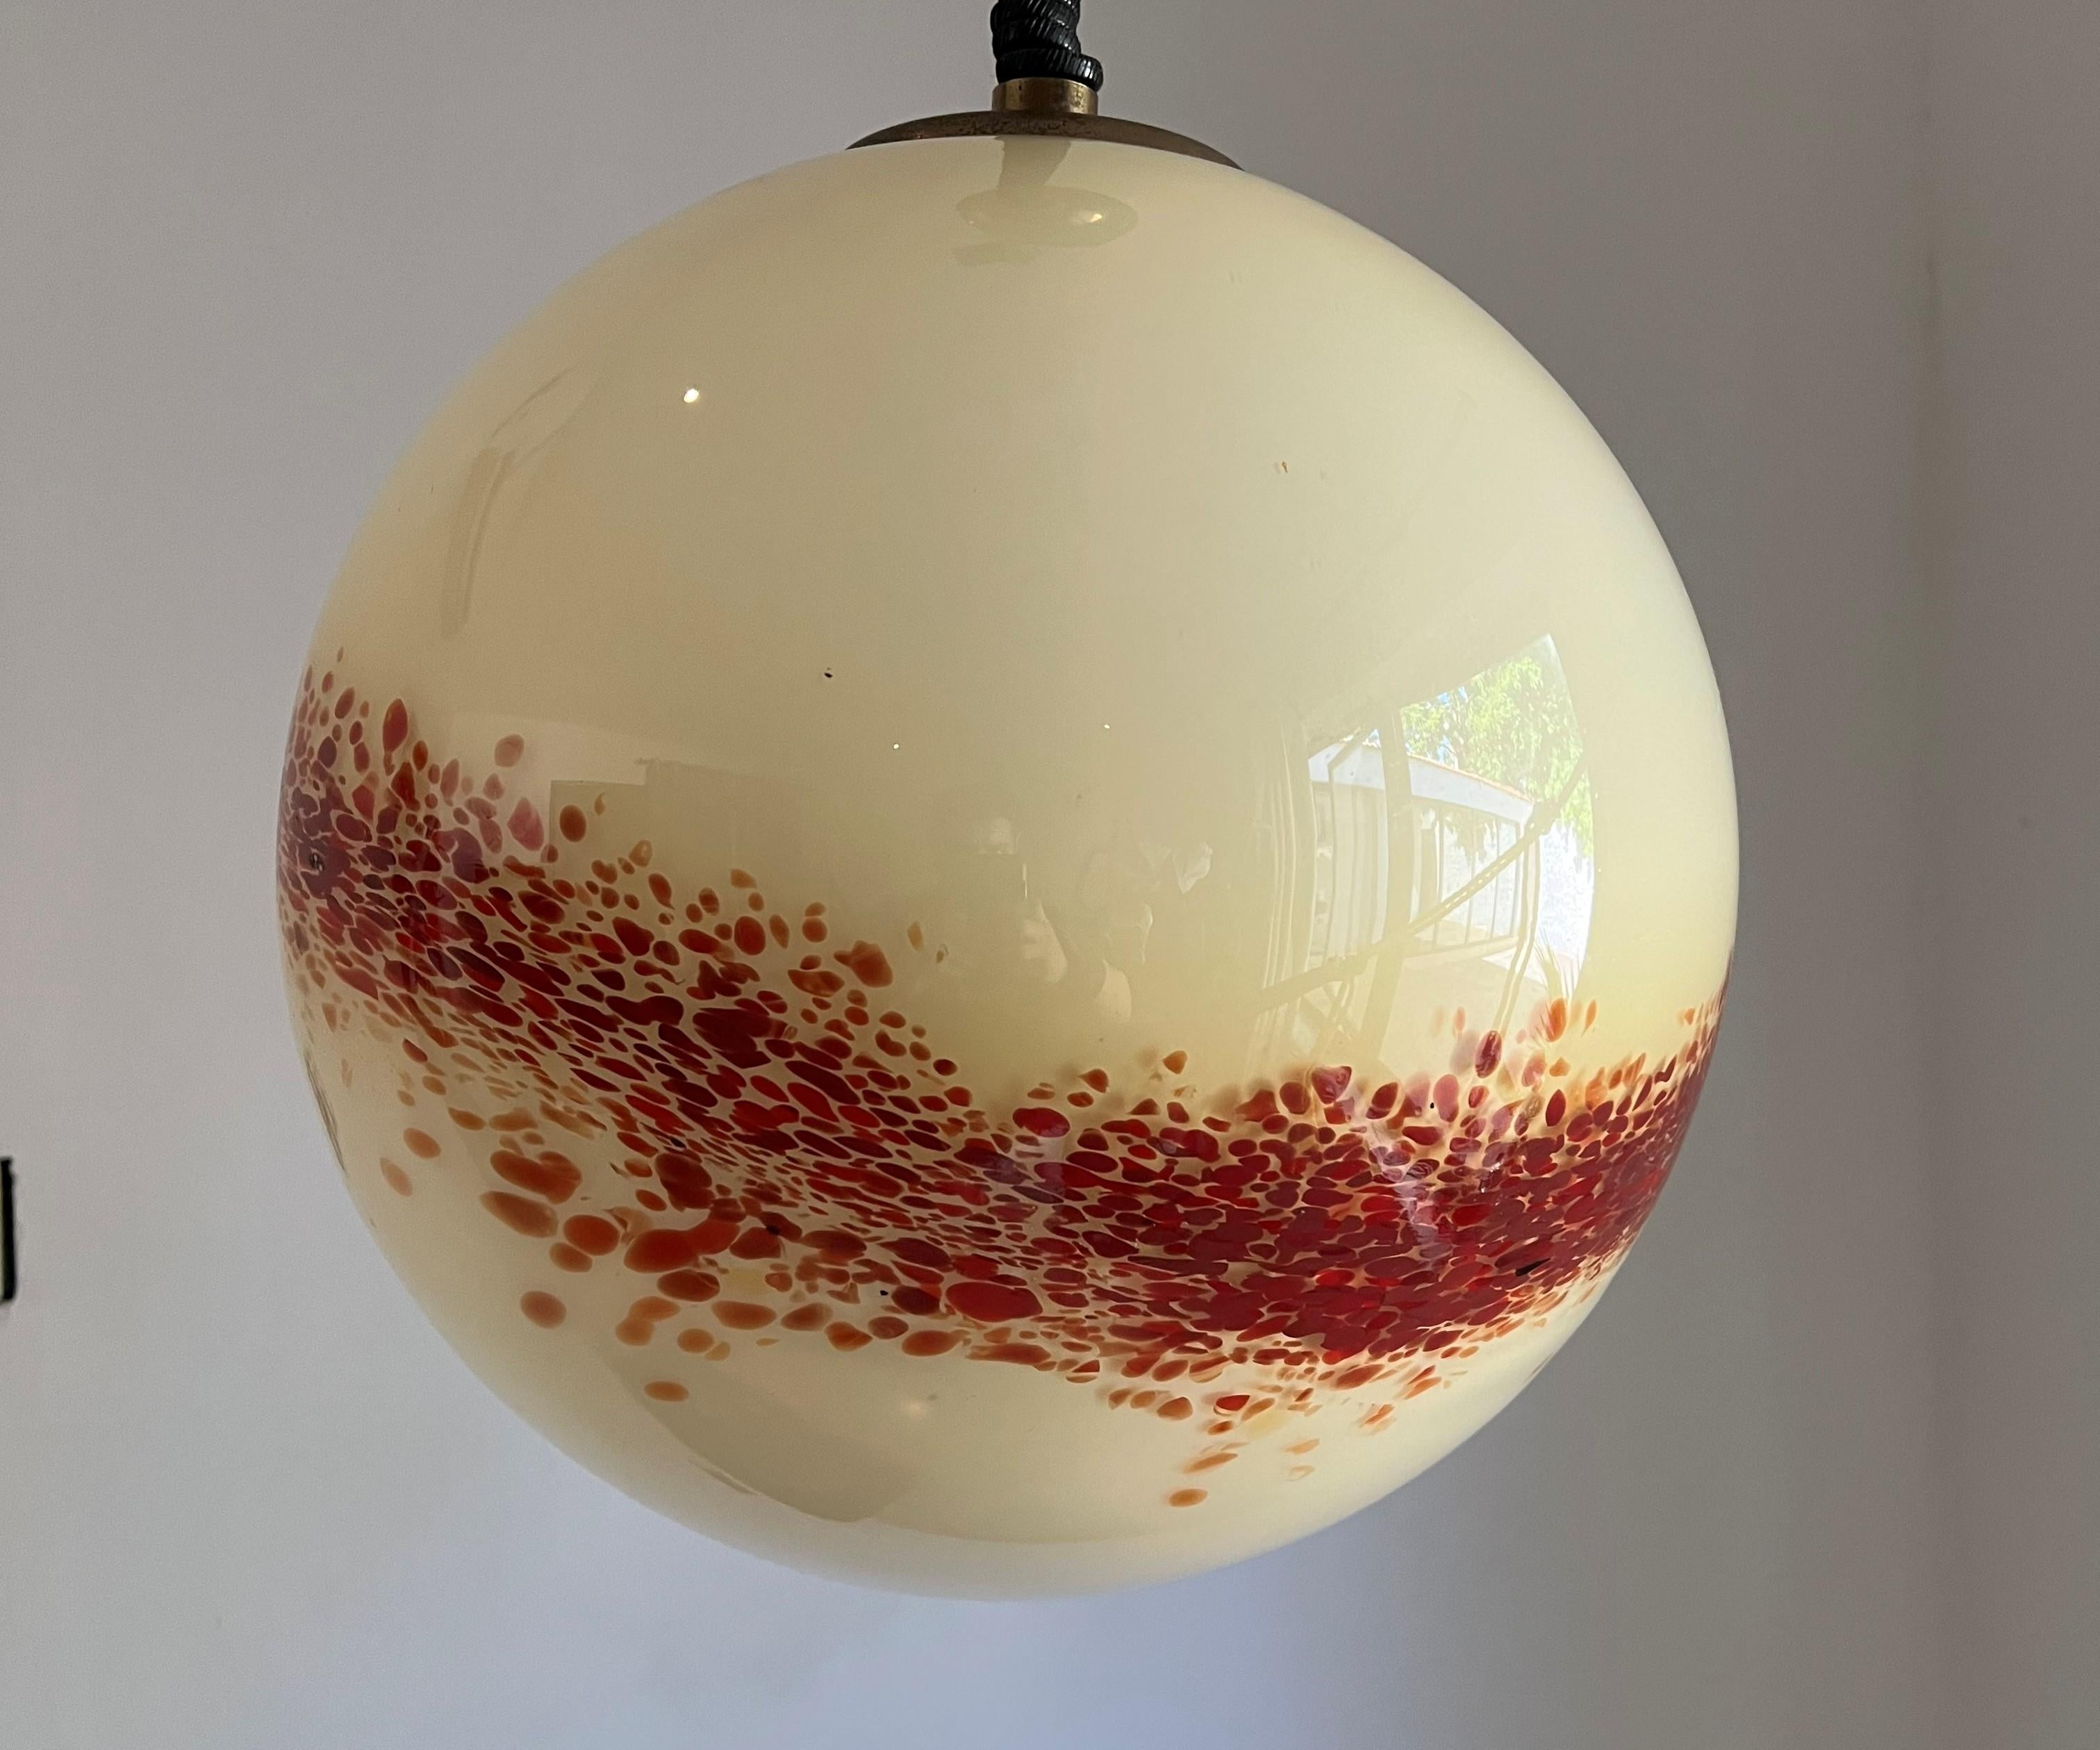 Space Age pendant light manufactured in cream and orange mottled hand blown Murano glass, in the style of Mazzega, circa 1970.
This sphere is 41 cm in Diameter.
It has its original coiled cable, we ran a new electric cord through it, it can easily